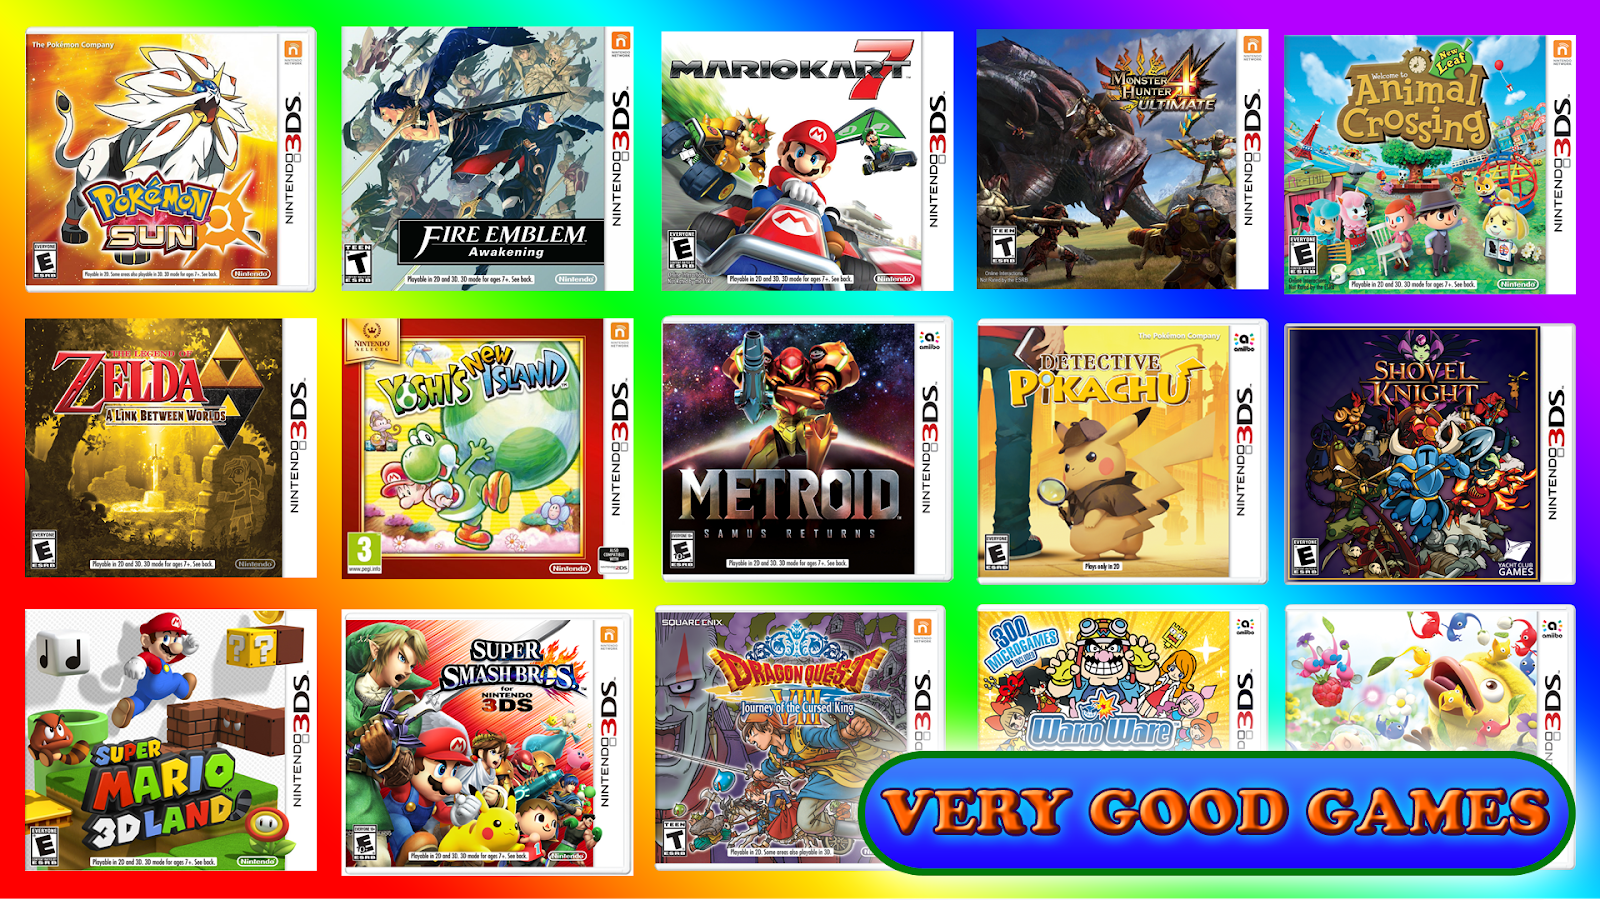 The best games for Nintendo 3DS family of Systems (Nintendo 2DS, 2DS XL)